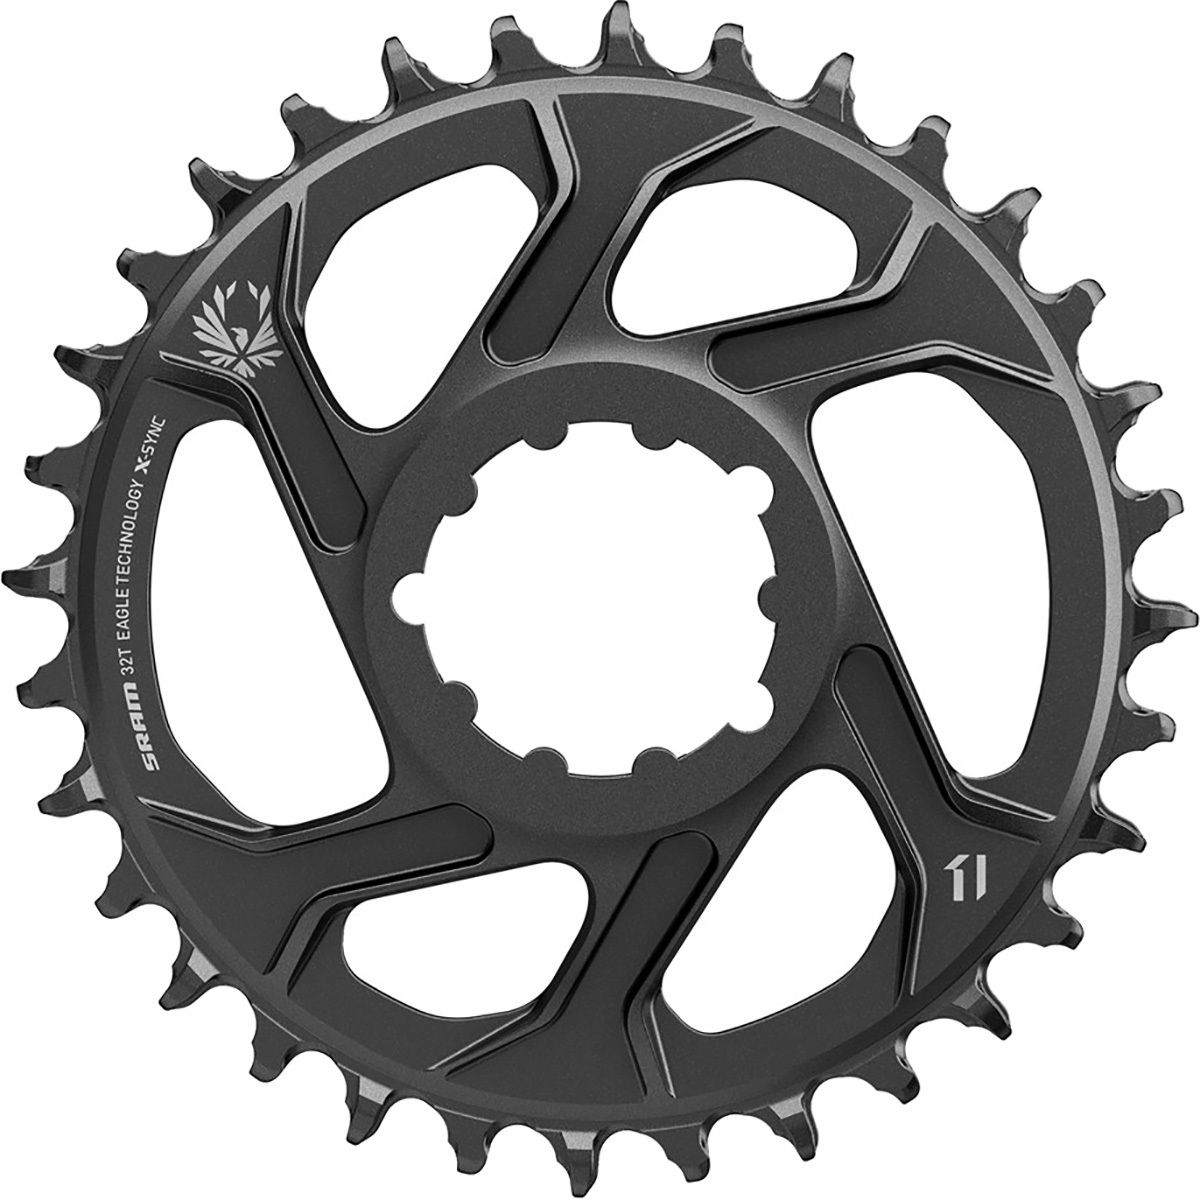 SRAM X Sync 2 Eagle 12 Speed Direct Mount Chainring